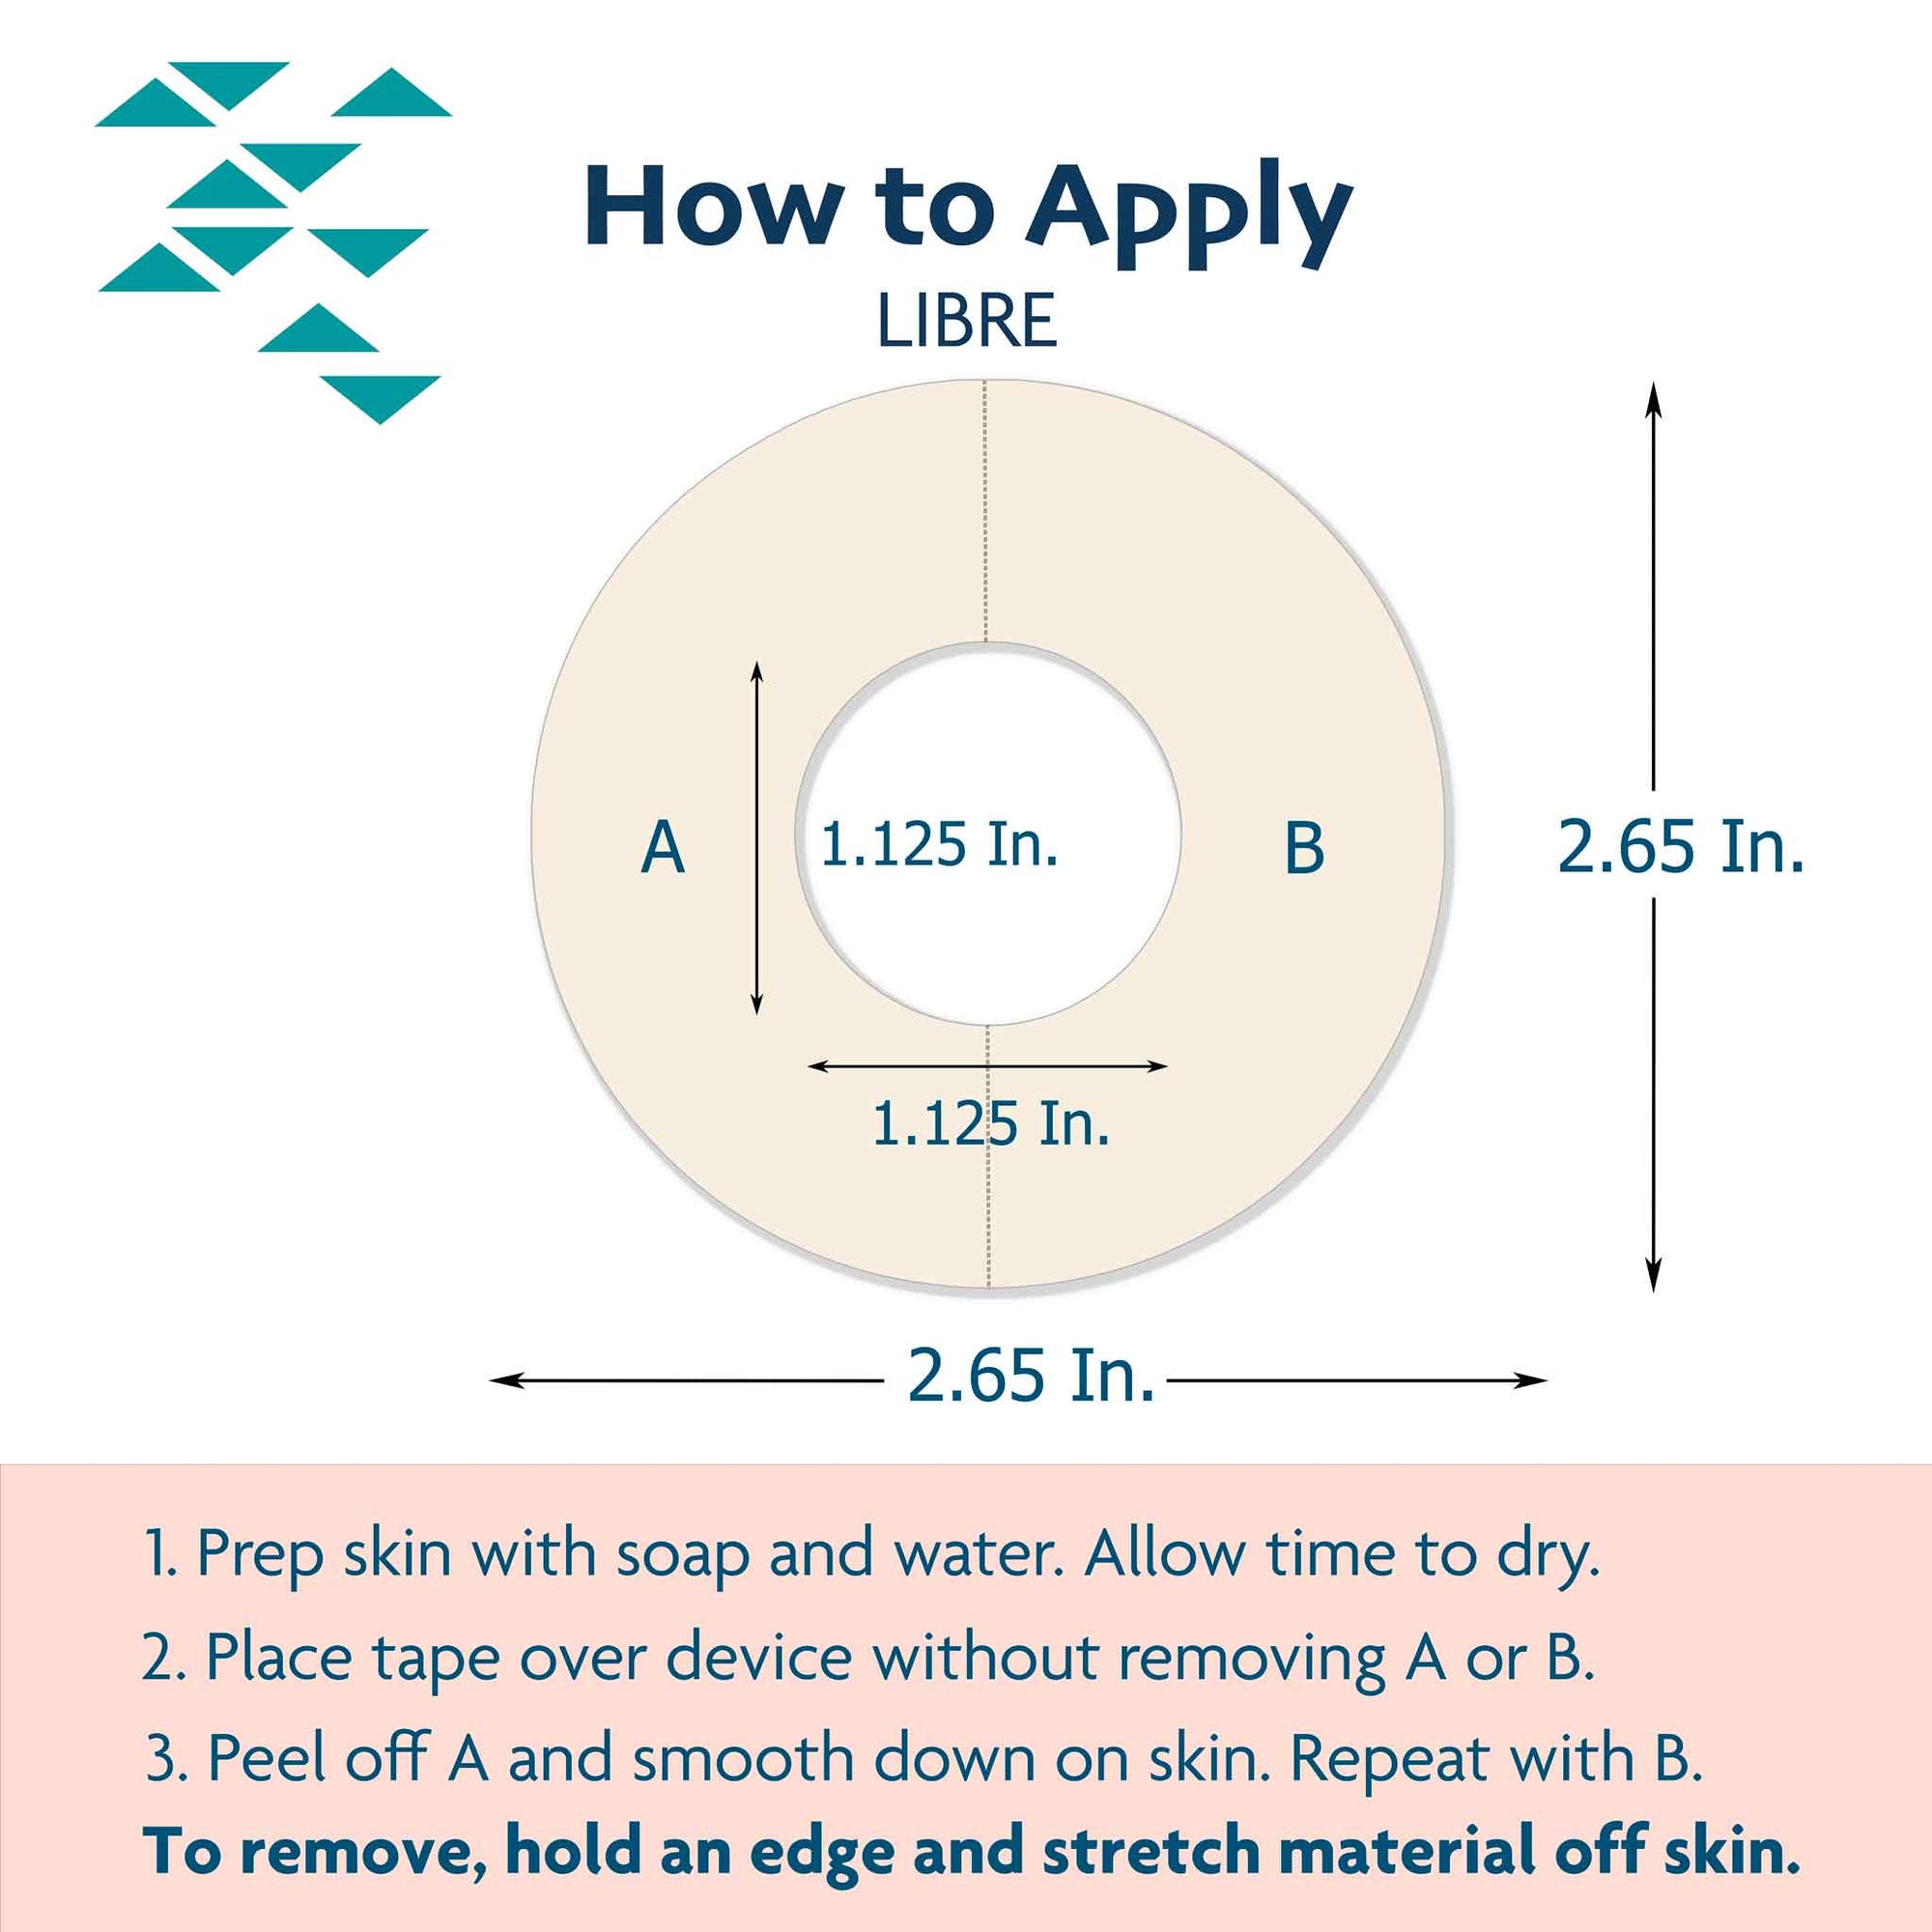 Instructions for proper application of libre adhesive covers step by step